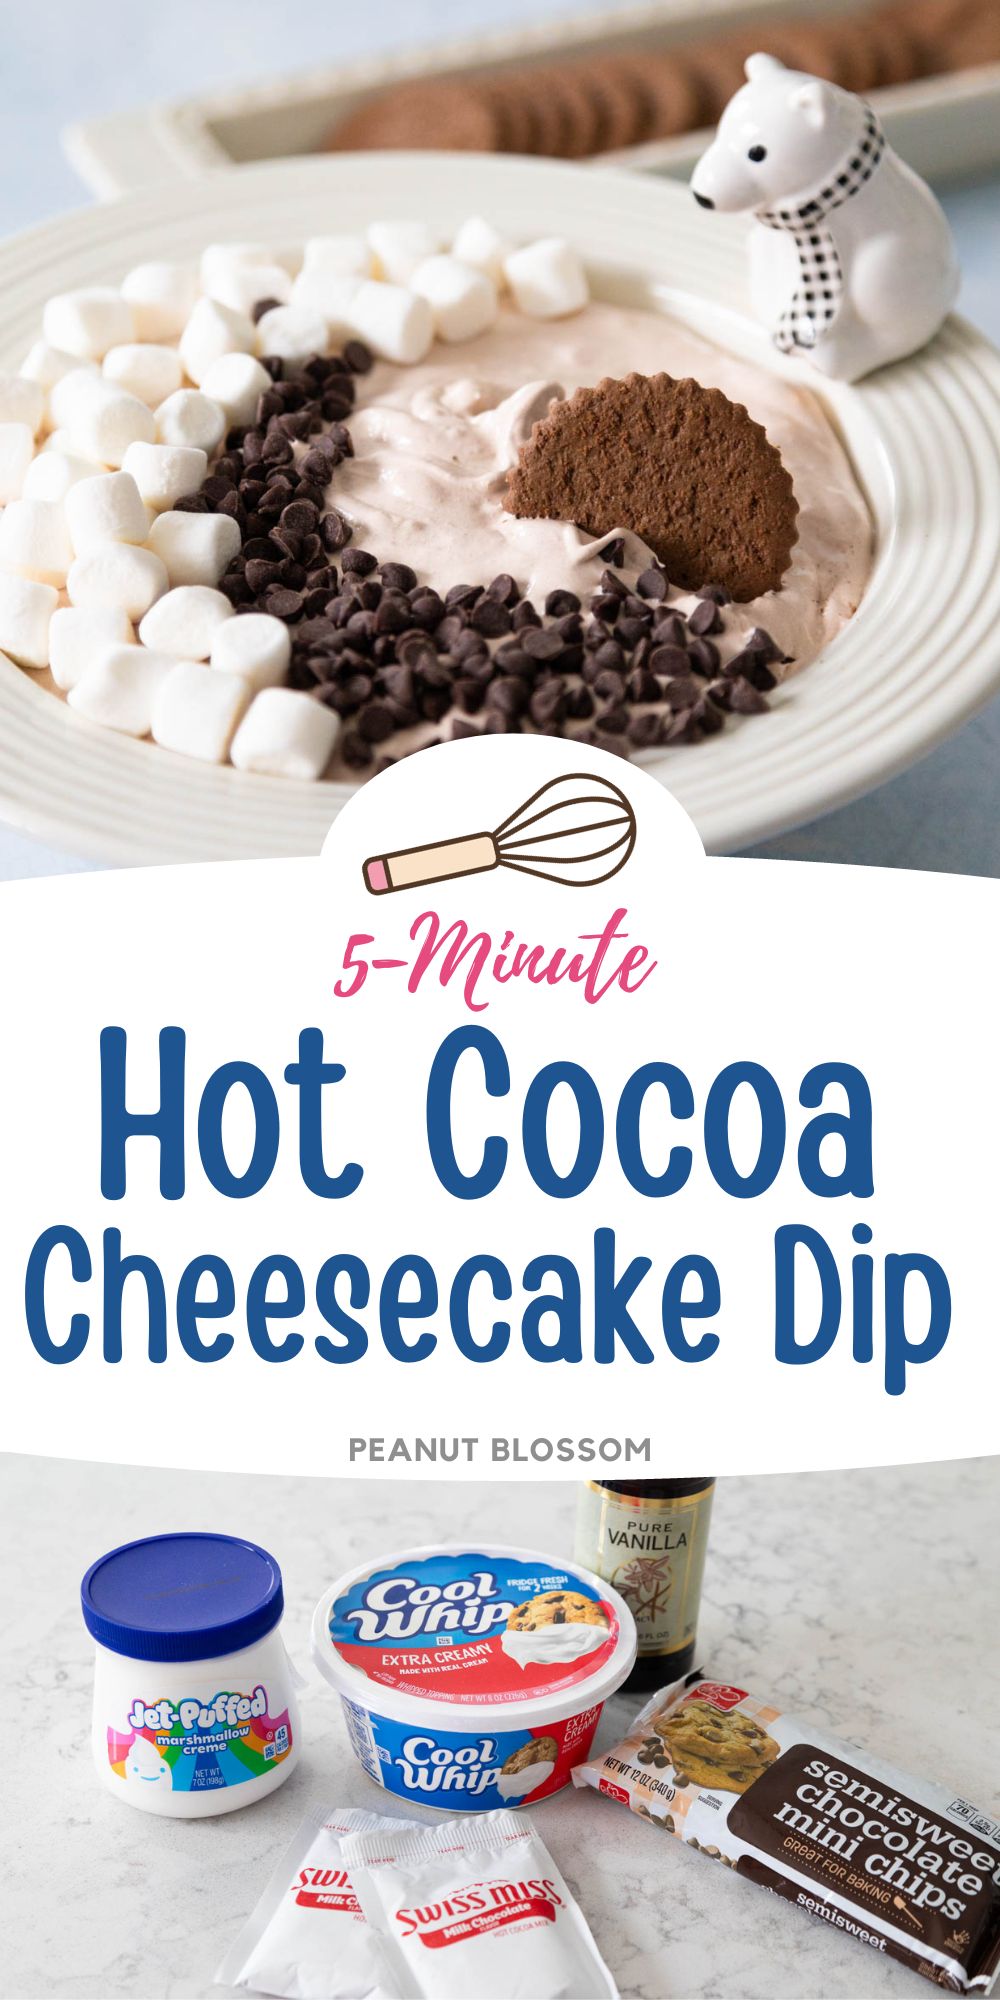 The photo collage shows the finished dessert dip next to the ingredients needed to make it.